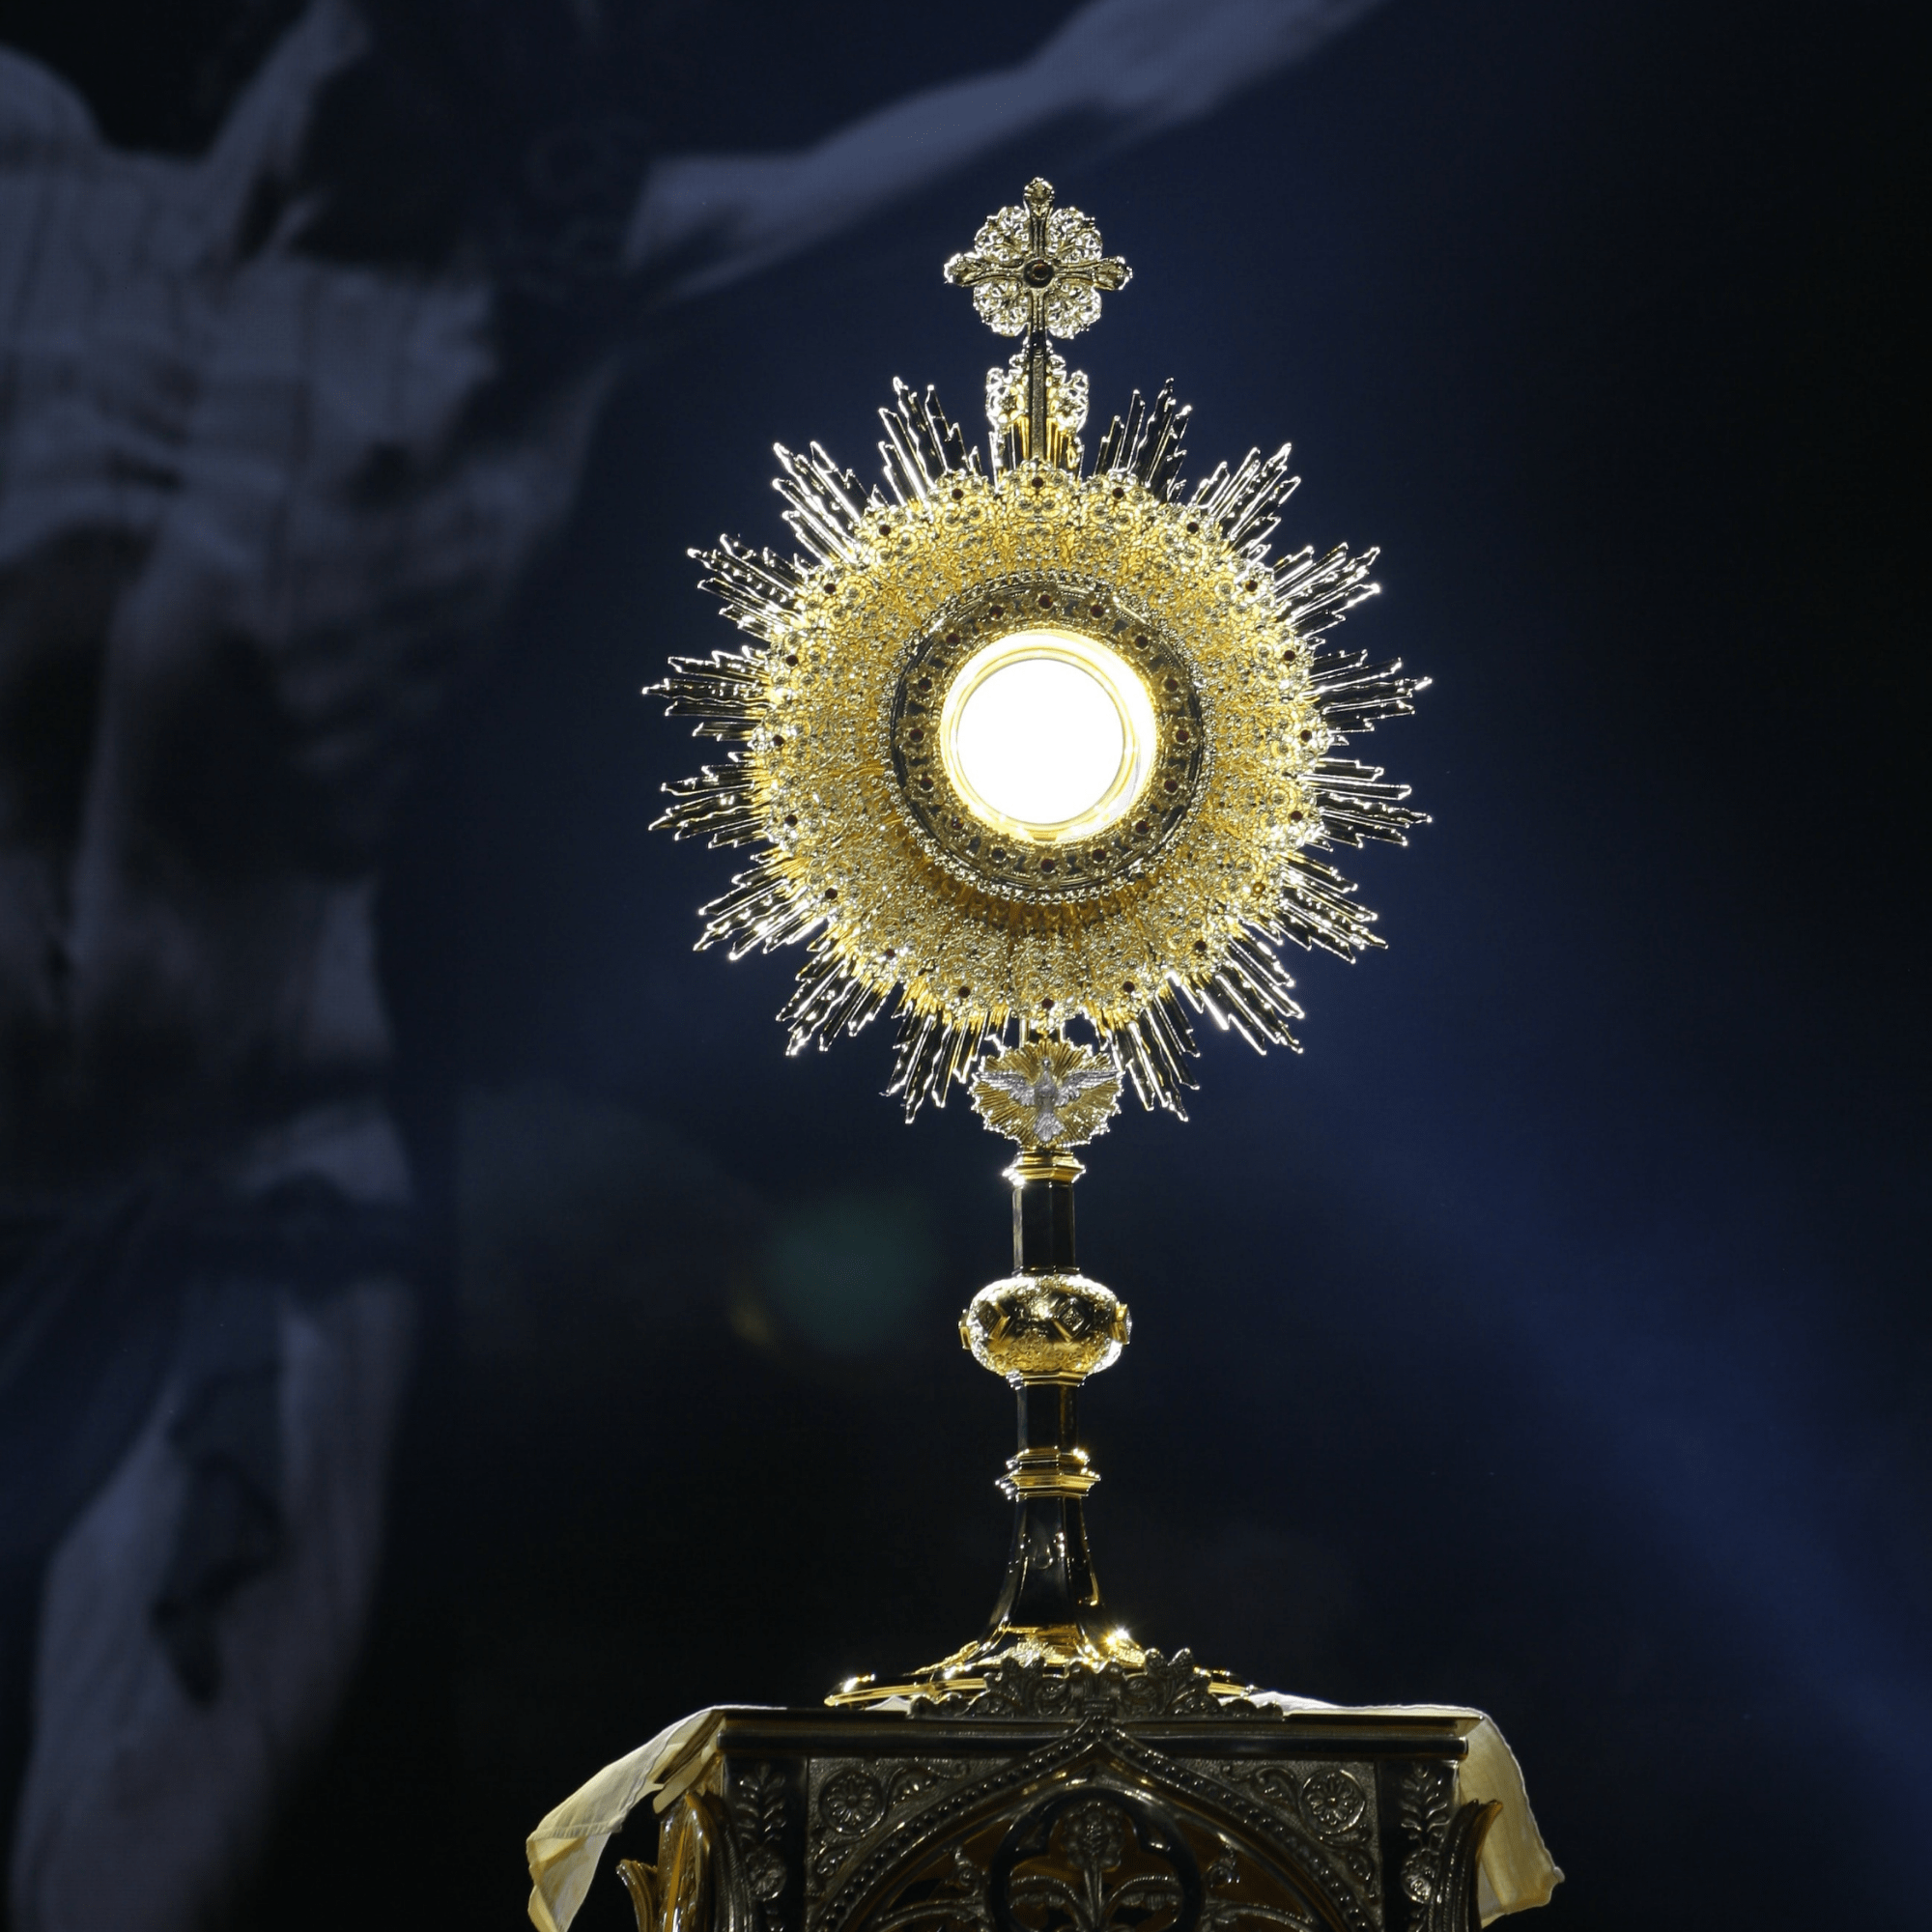 How to Pray Before the Blessed Sacrament